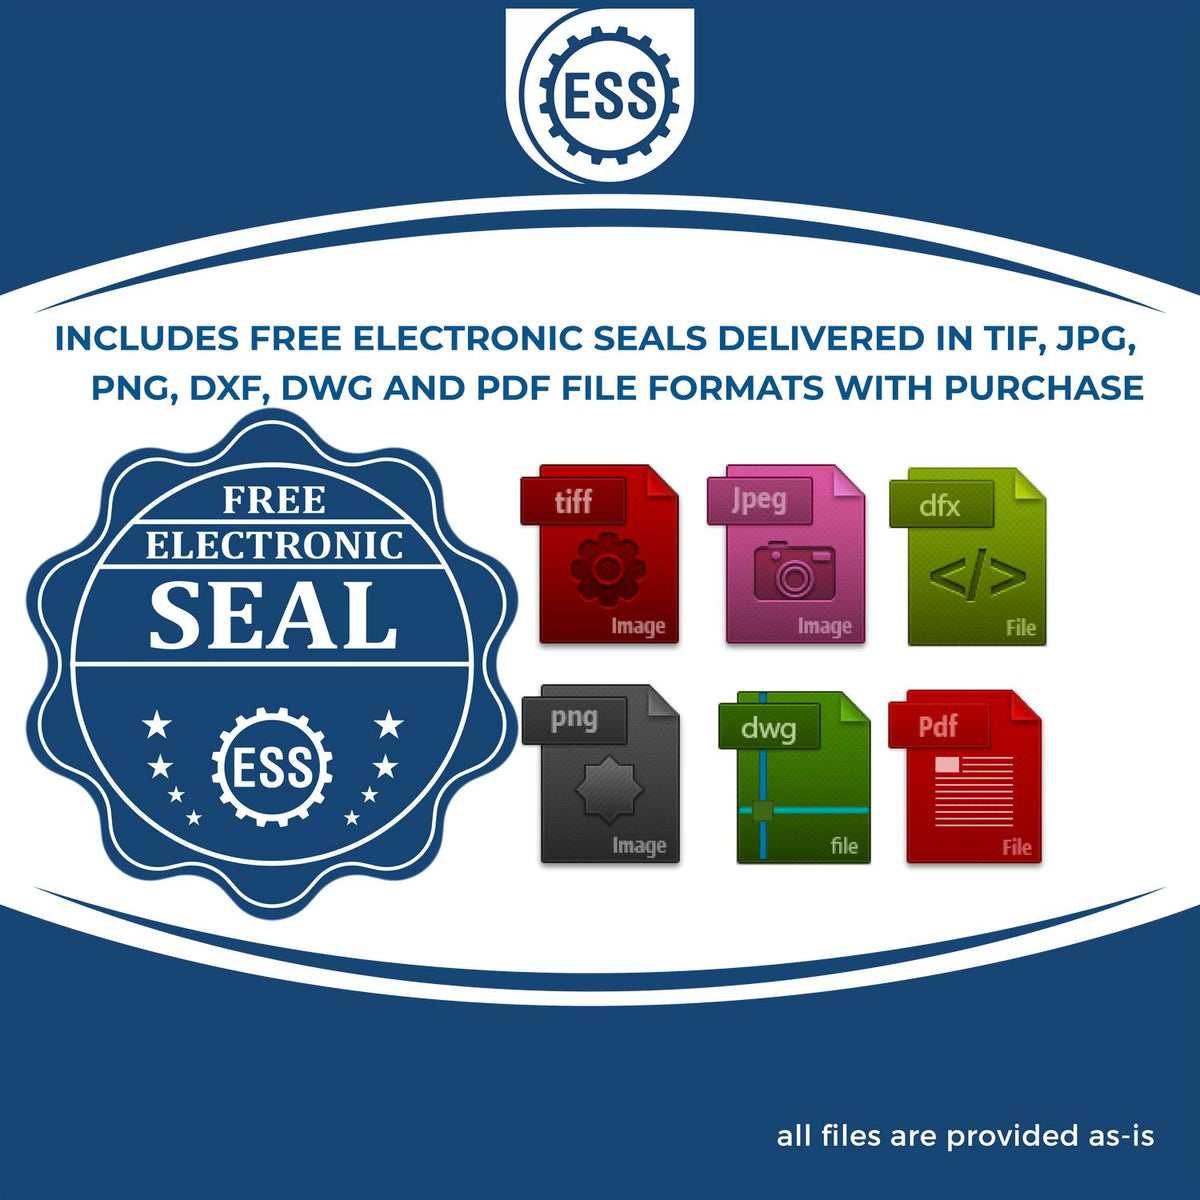 An infographic for the free electronic seal for the Mississippi Engineer Desk Seal illustrating the different file type icons such as DXF, DWG, TIF, JPG and PNG.